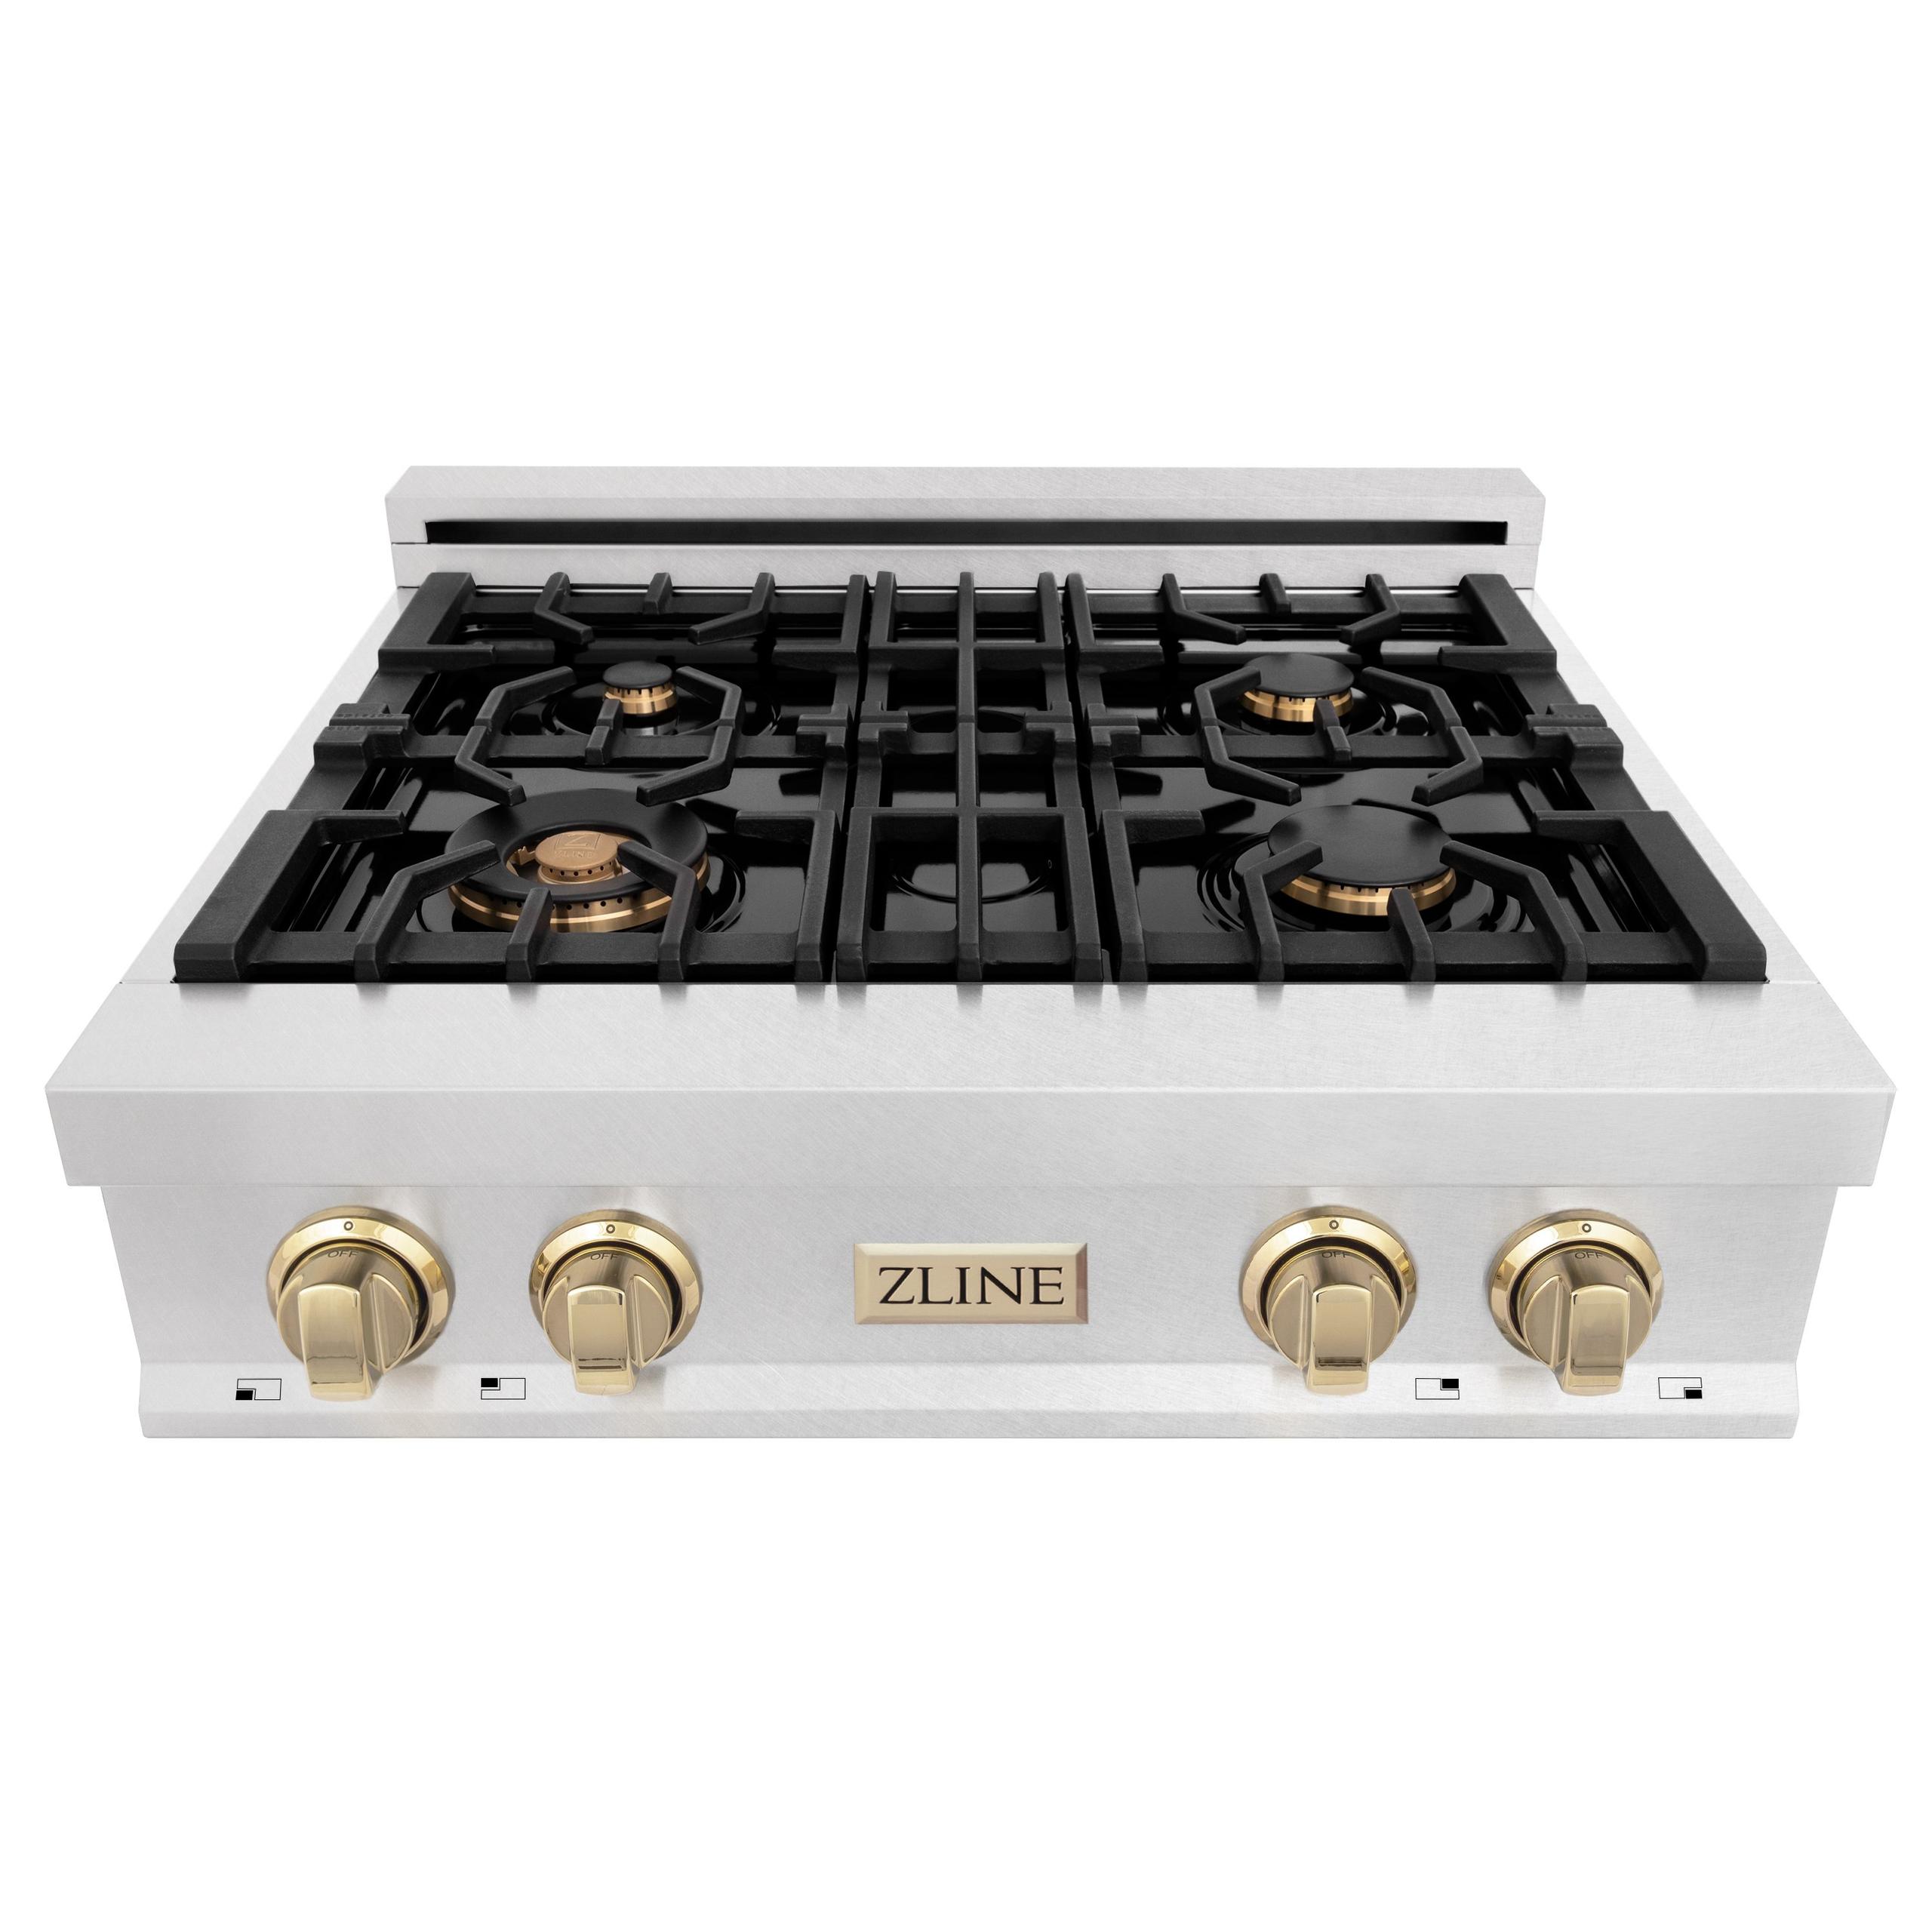 ZLINE KITCHEN AND BATH RTSZ30G ZLINE Autograph Edition 30" Porcelain Rangetop with 4 Gas Burners in DuraSnow R Stainless Steel and Accents Color: Gold